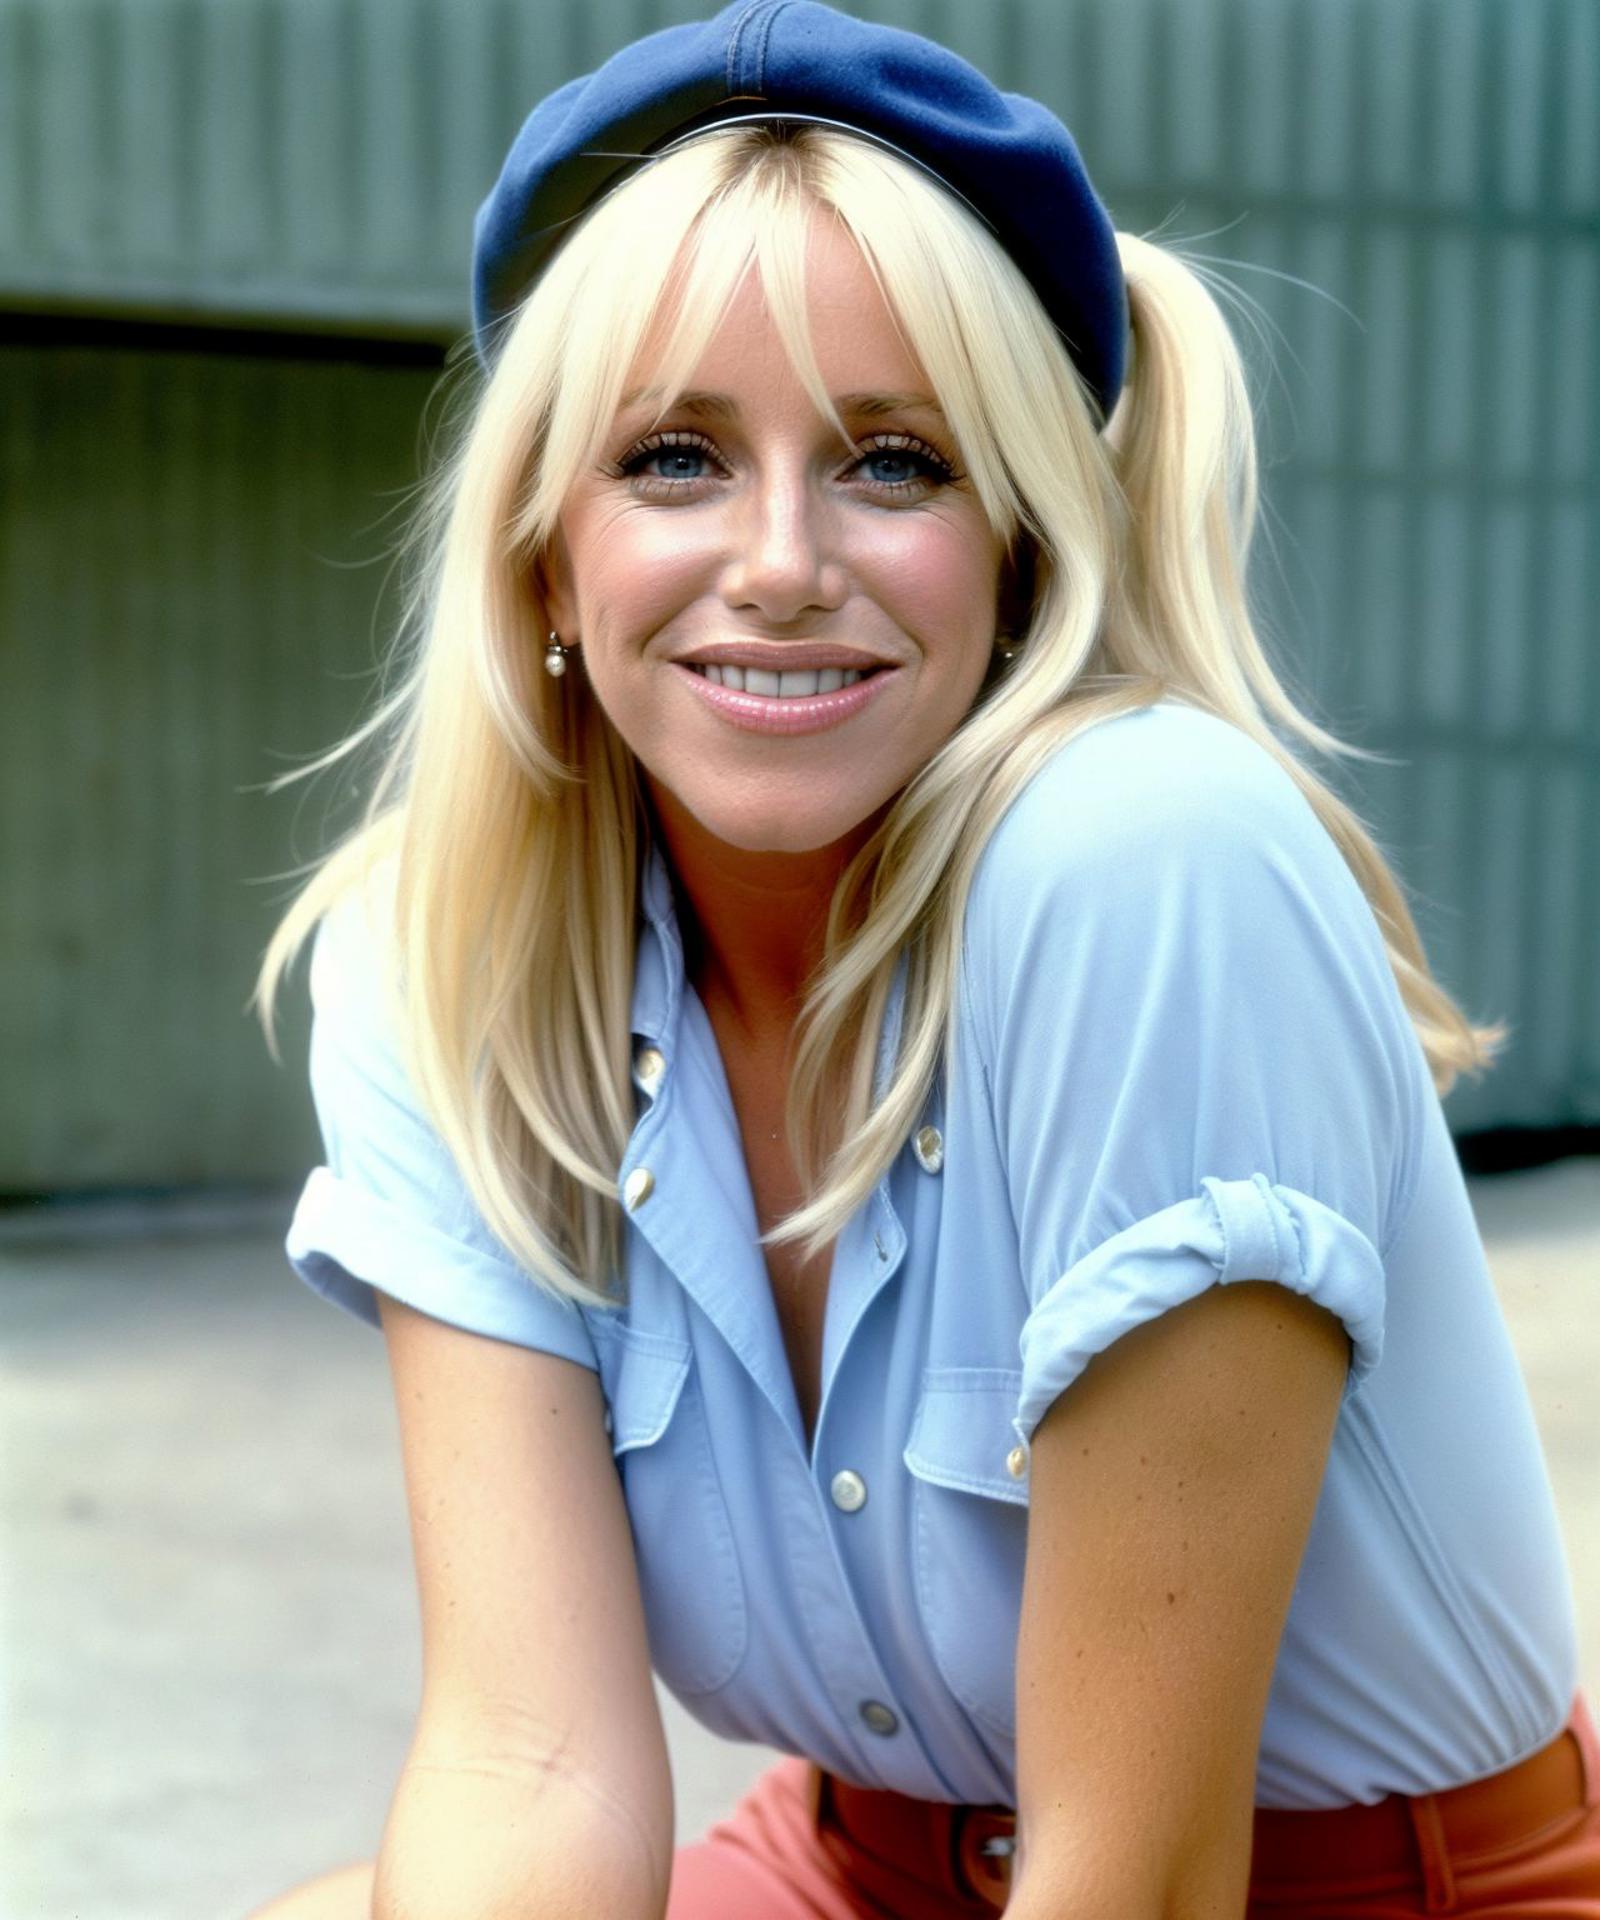 Suzanne Somers image by Man0War